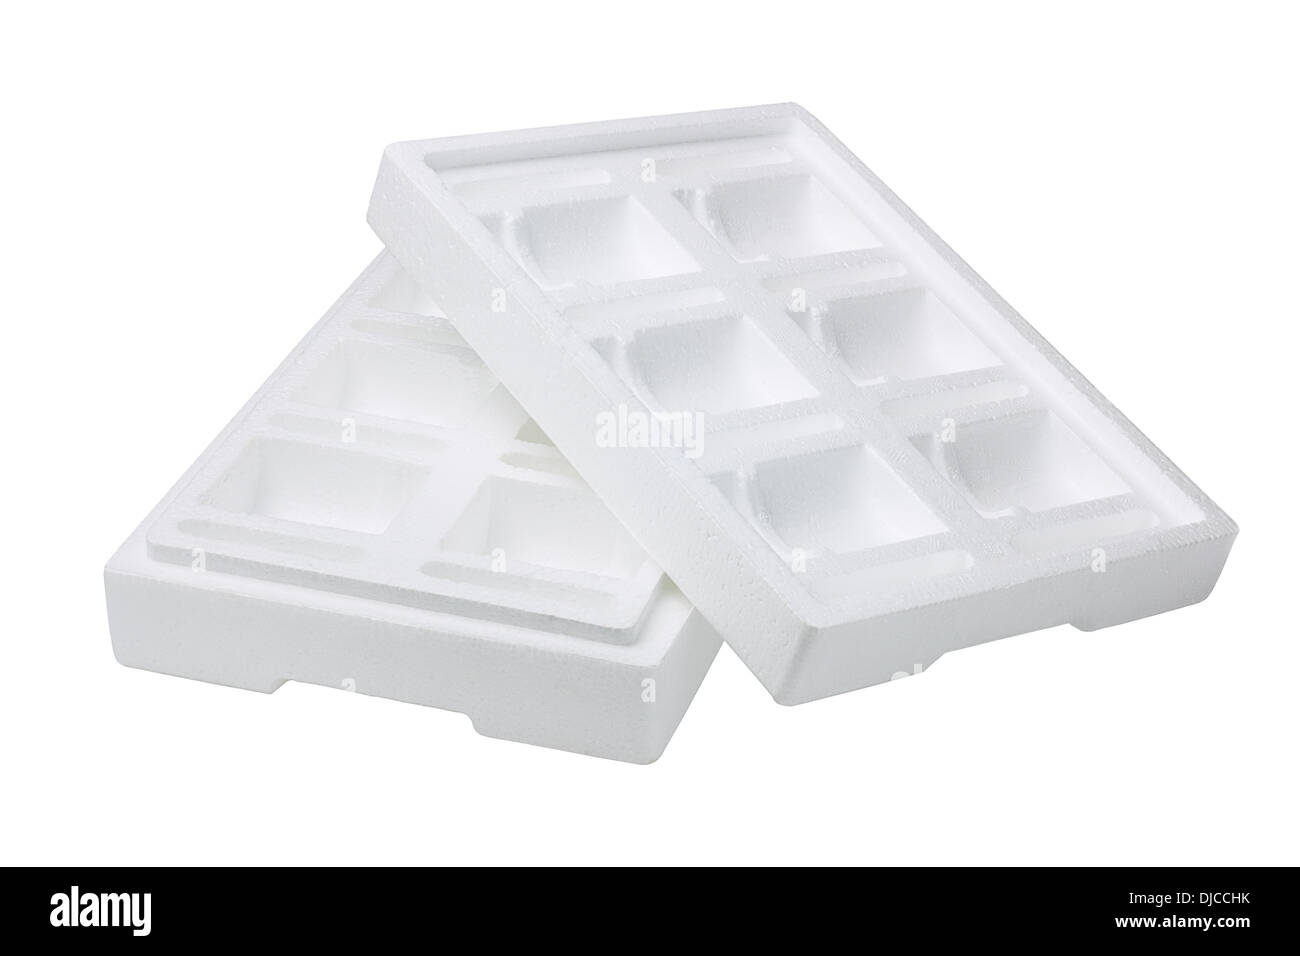 Protective Styrofoam Storage Box For Packaging On White Background Stock Photo